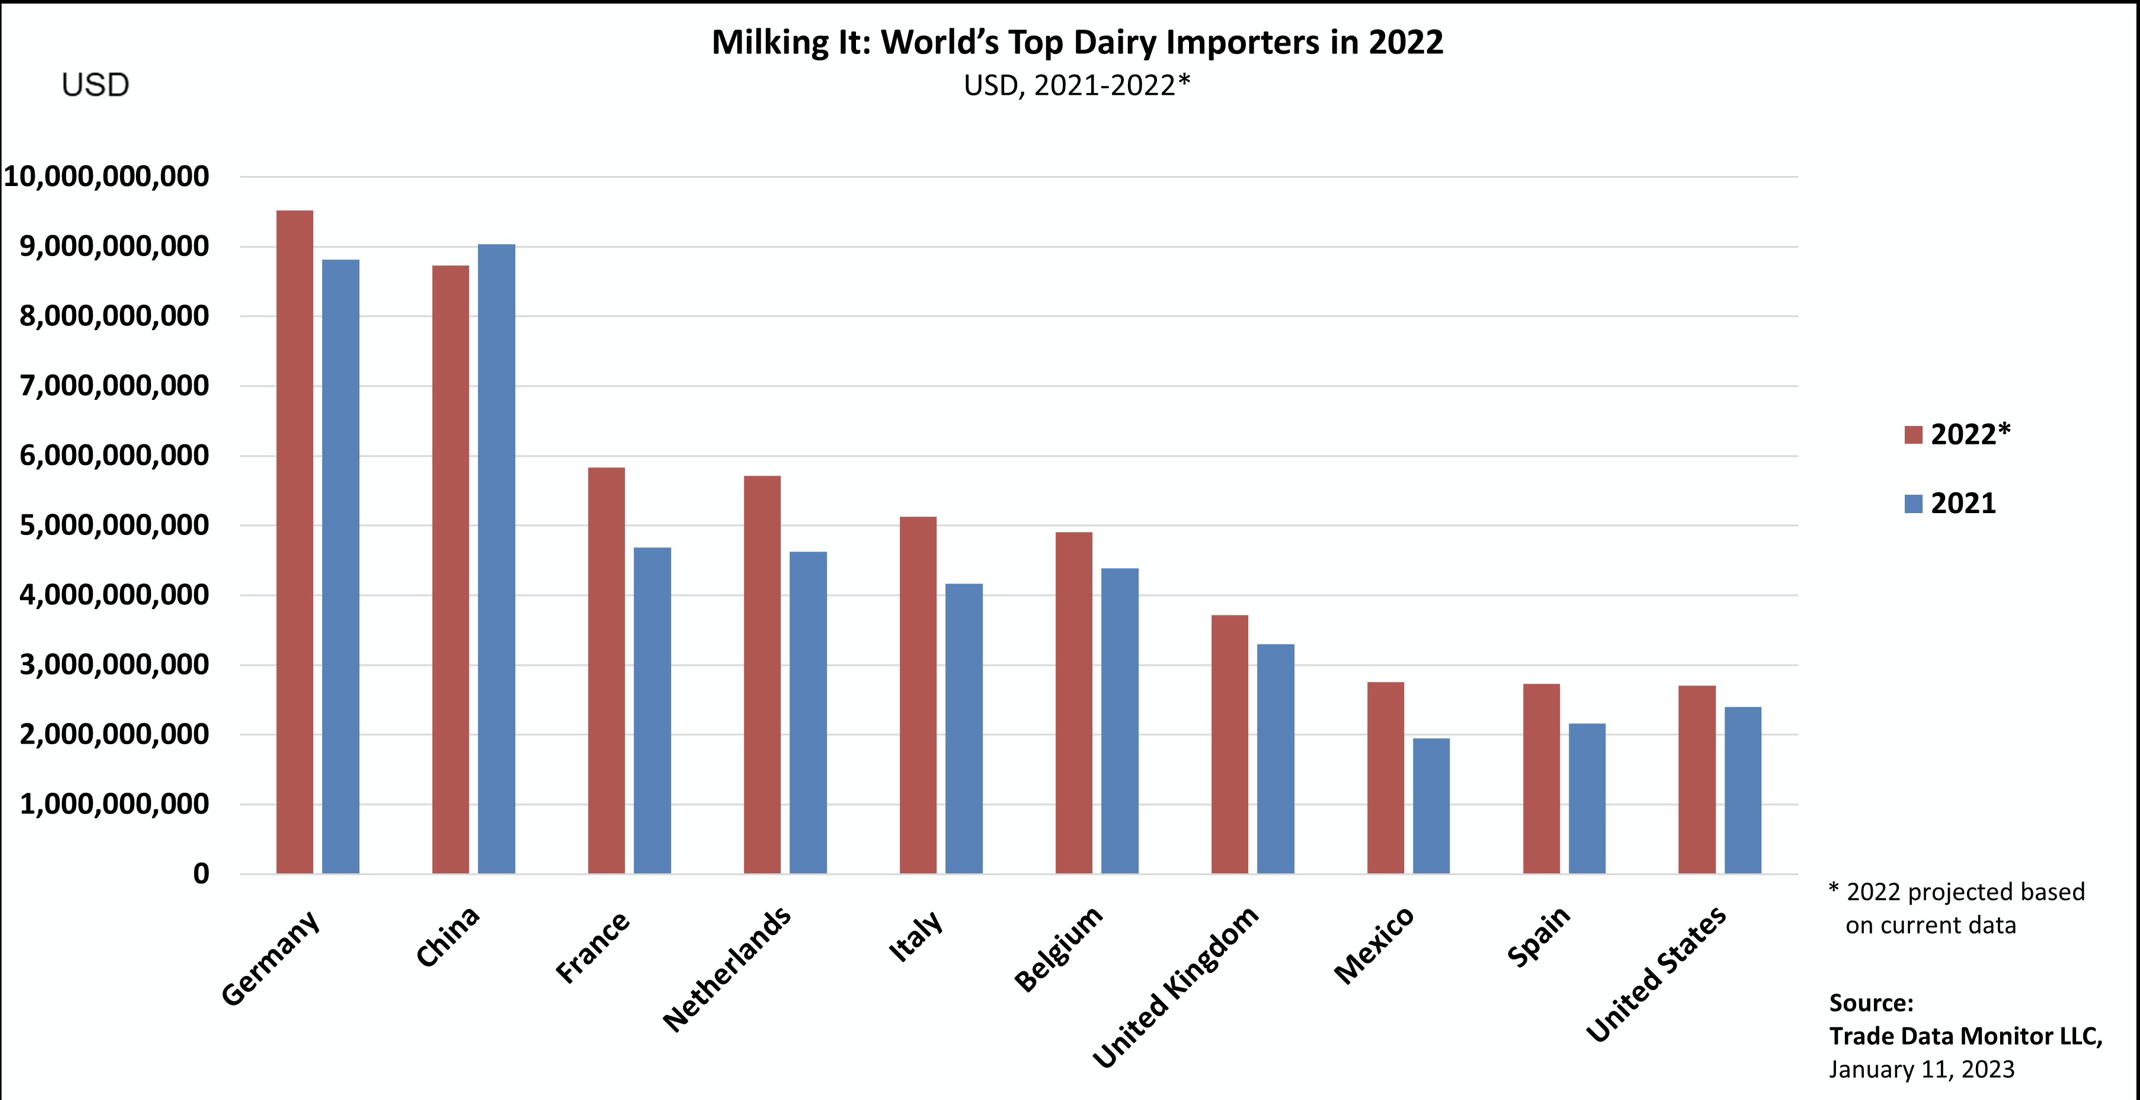 Global Dairy Trade Increased 11% in 2022